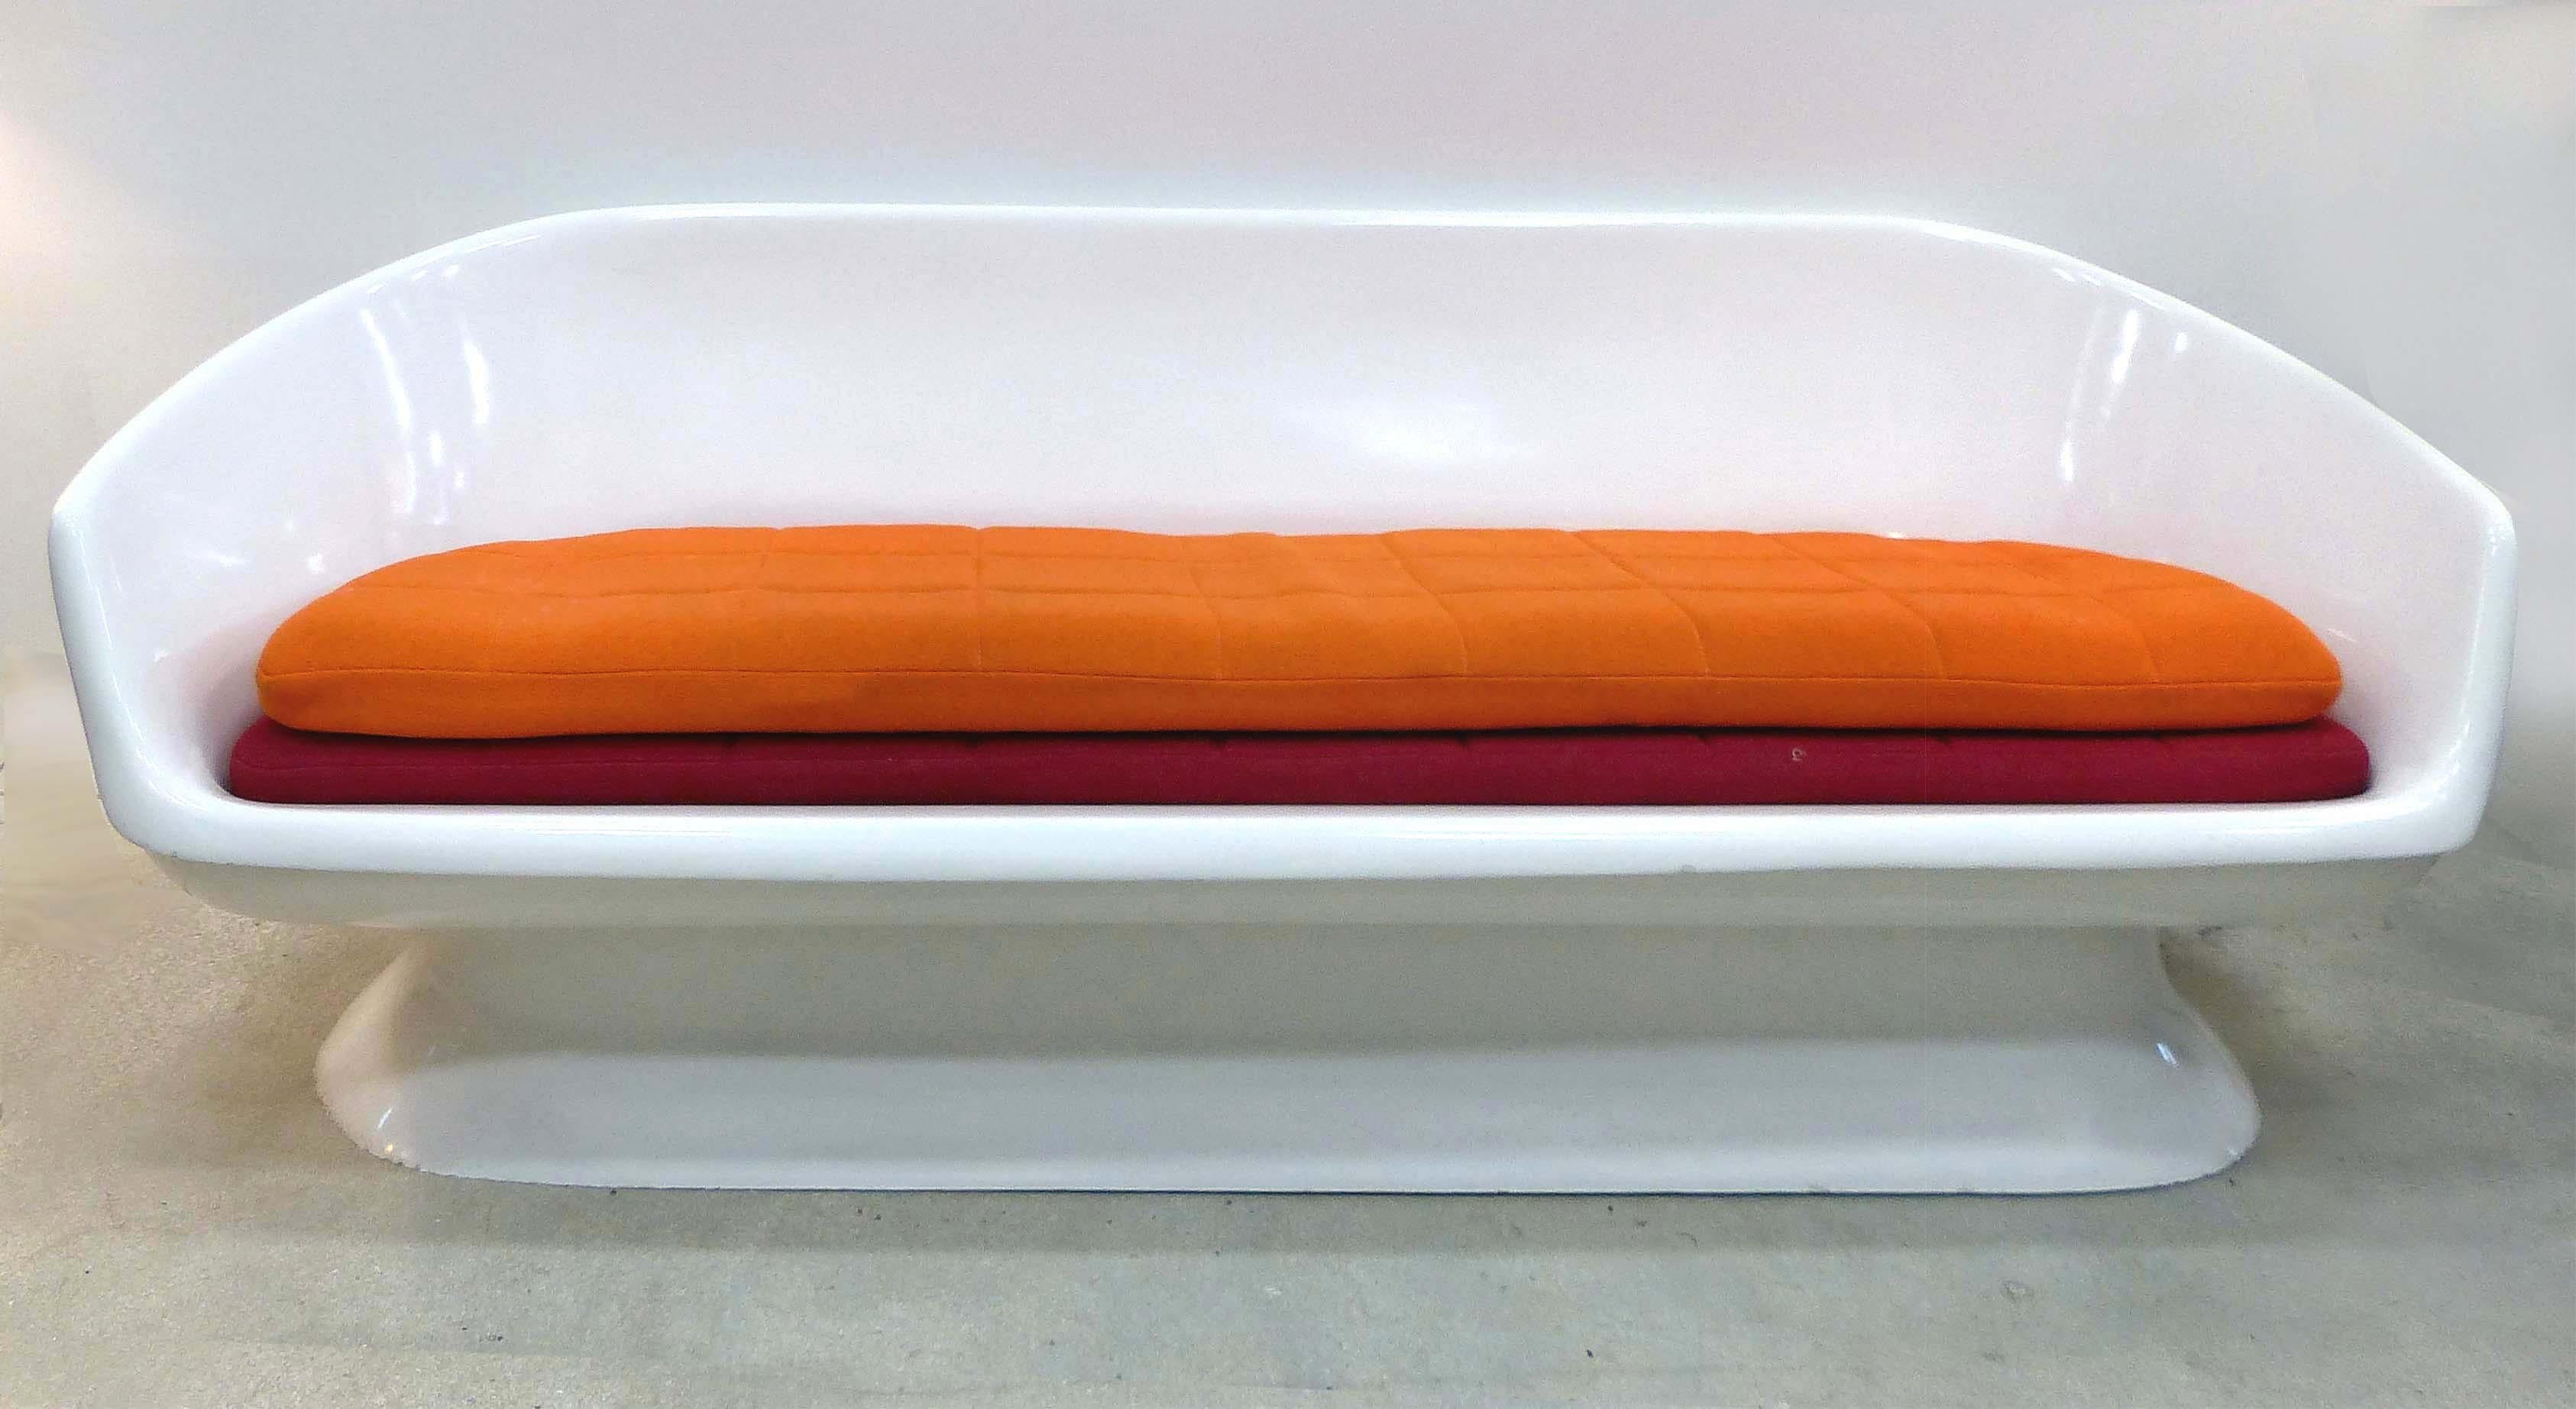 Chromcraft Space Age Enameled Fiberglass Shell Sofa, circa 1960s

Offered for sale is an American 